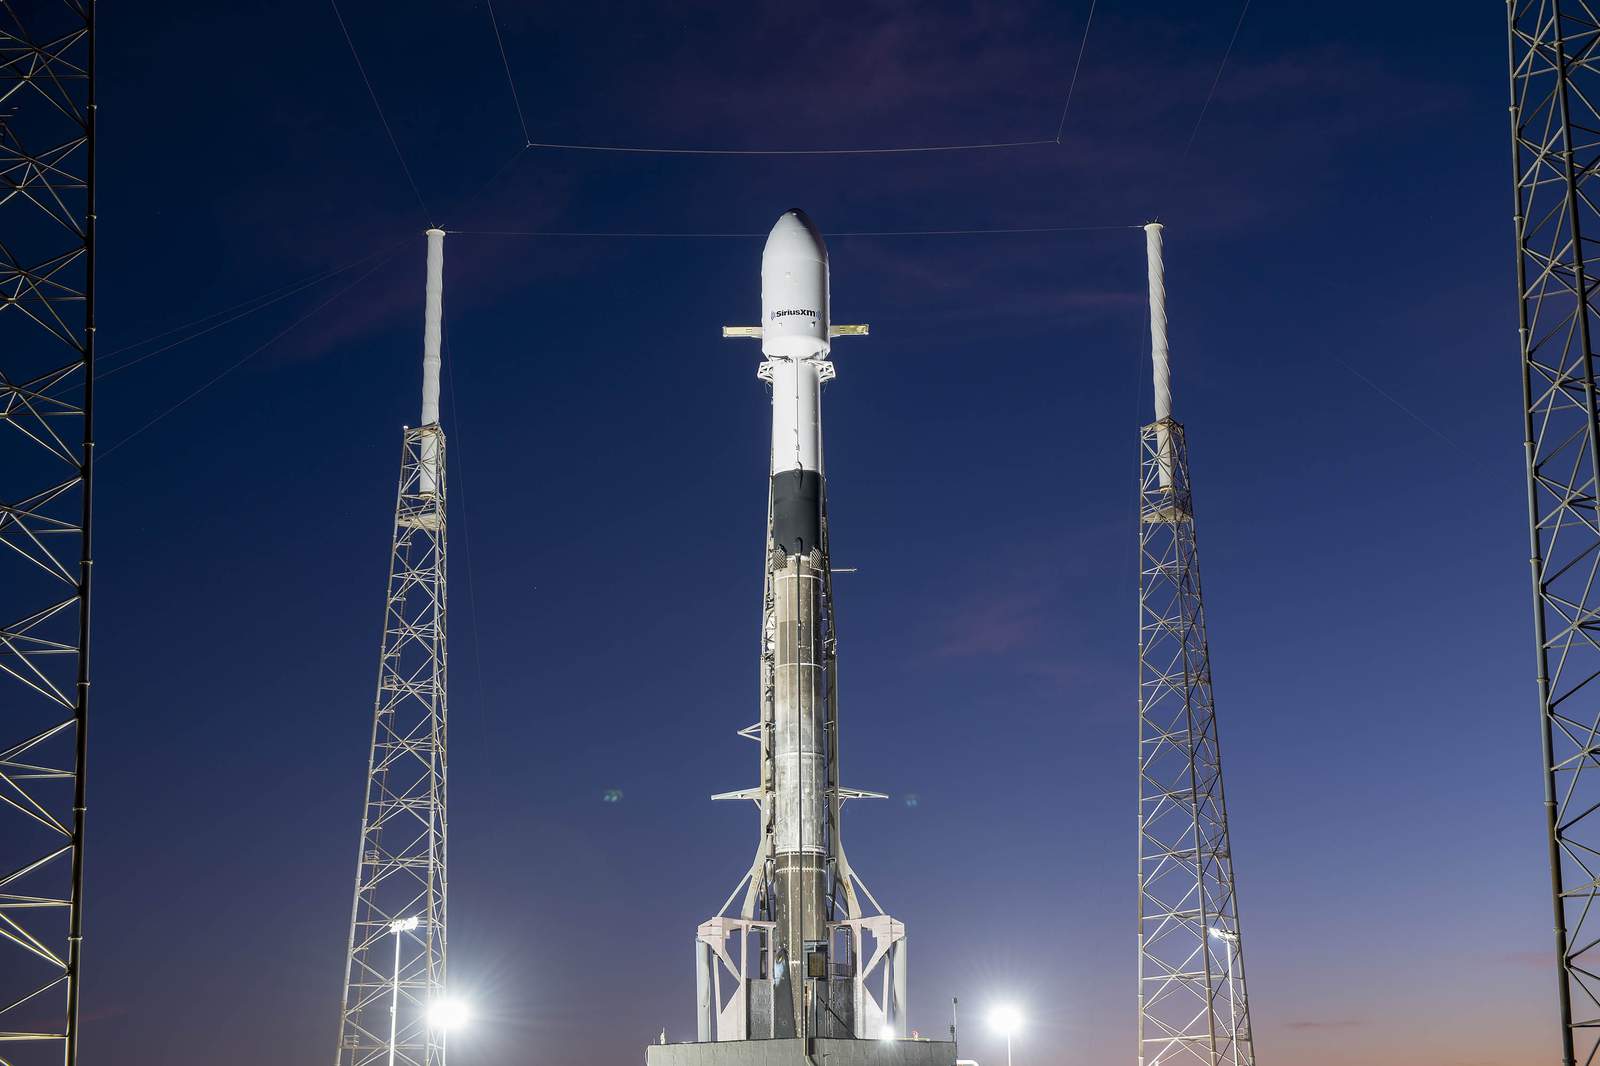 WATCH LIVE: SpaceX to launch SXM-7 mission from Florida